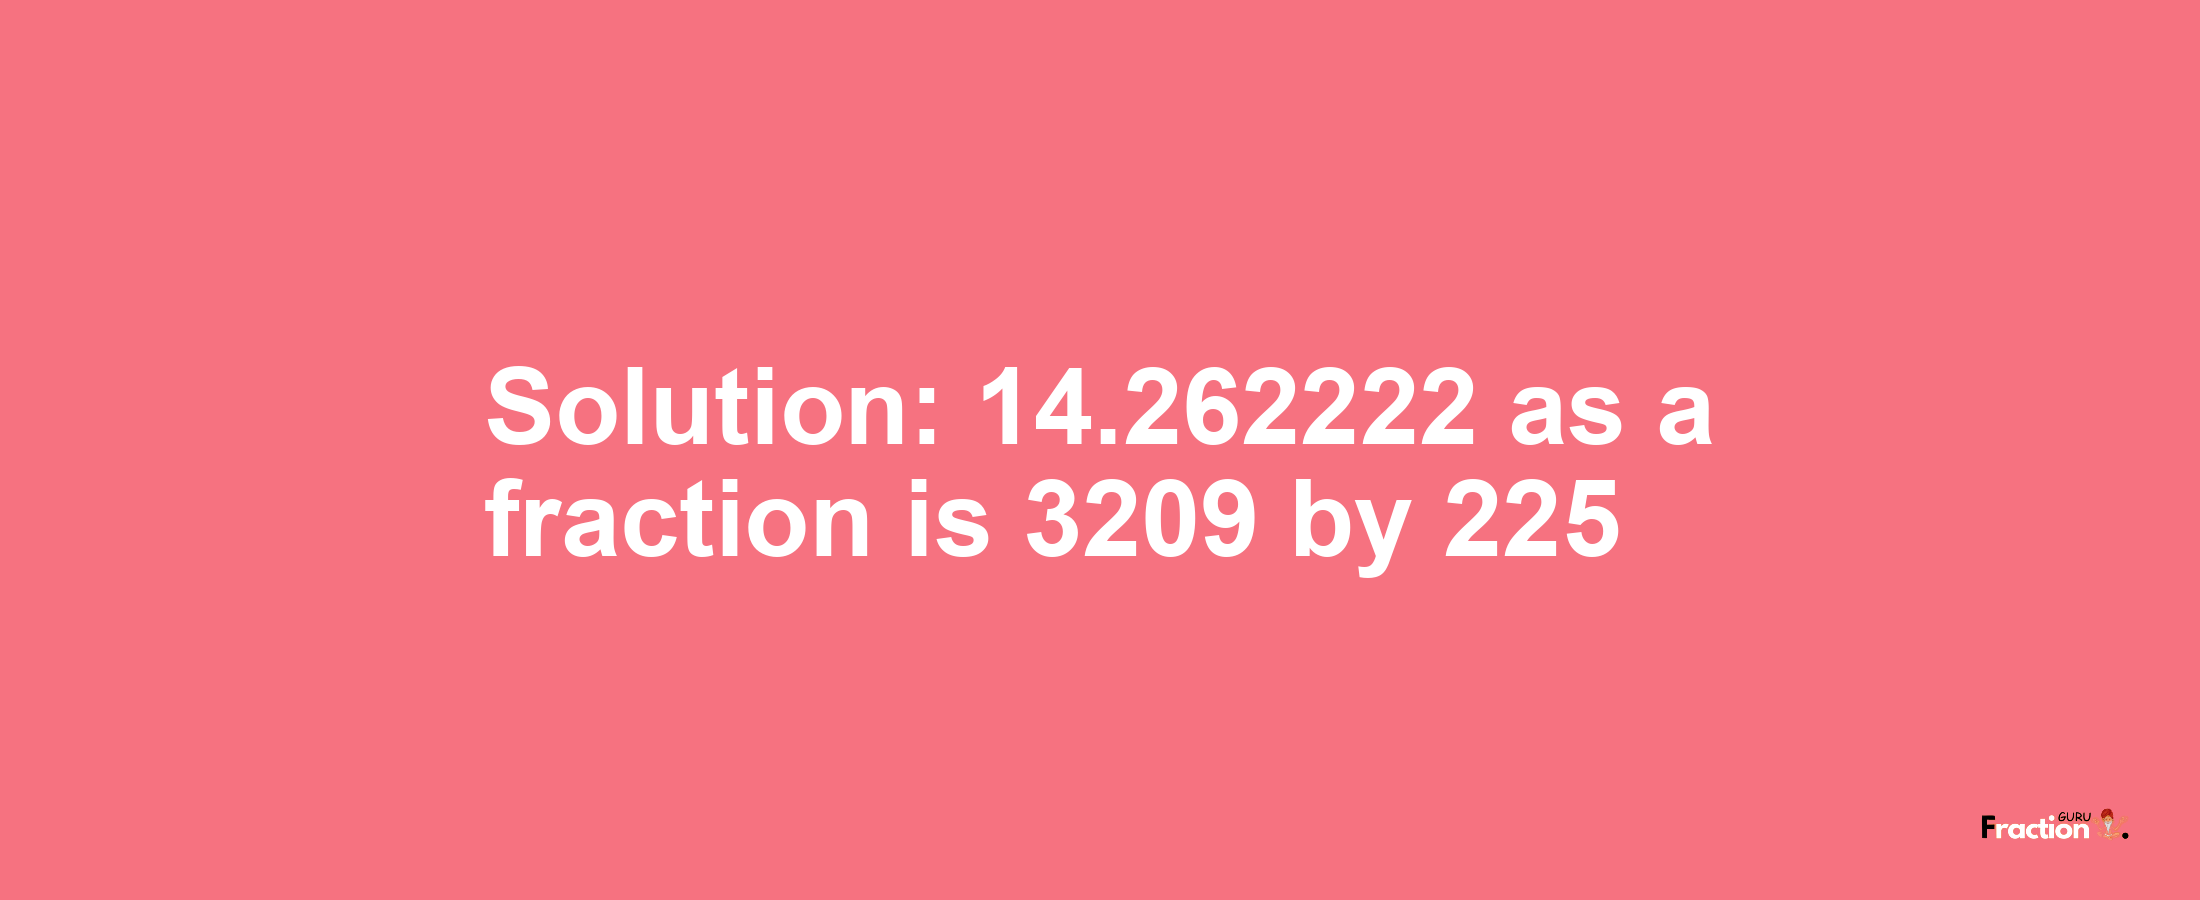 Solution:14.262222 as a fraction is 3209/225